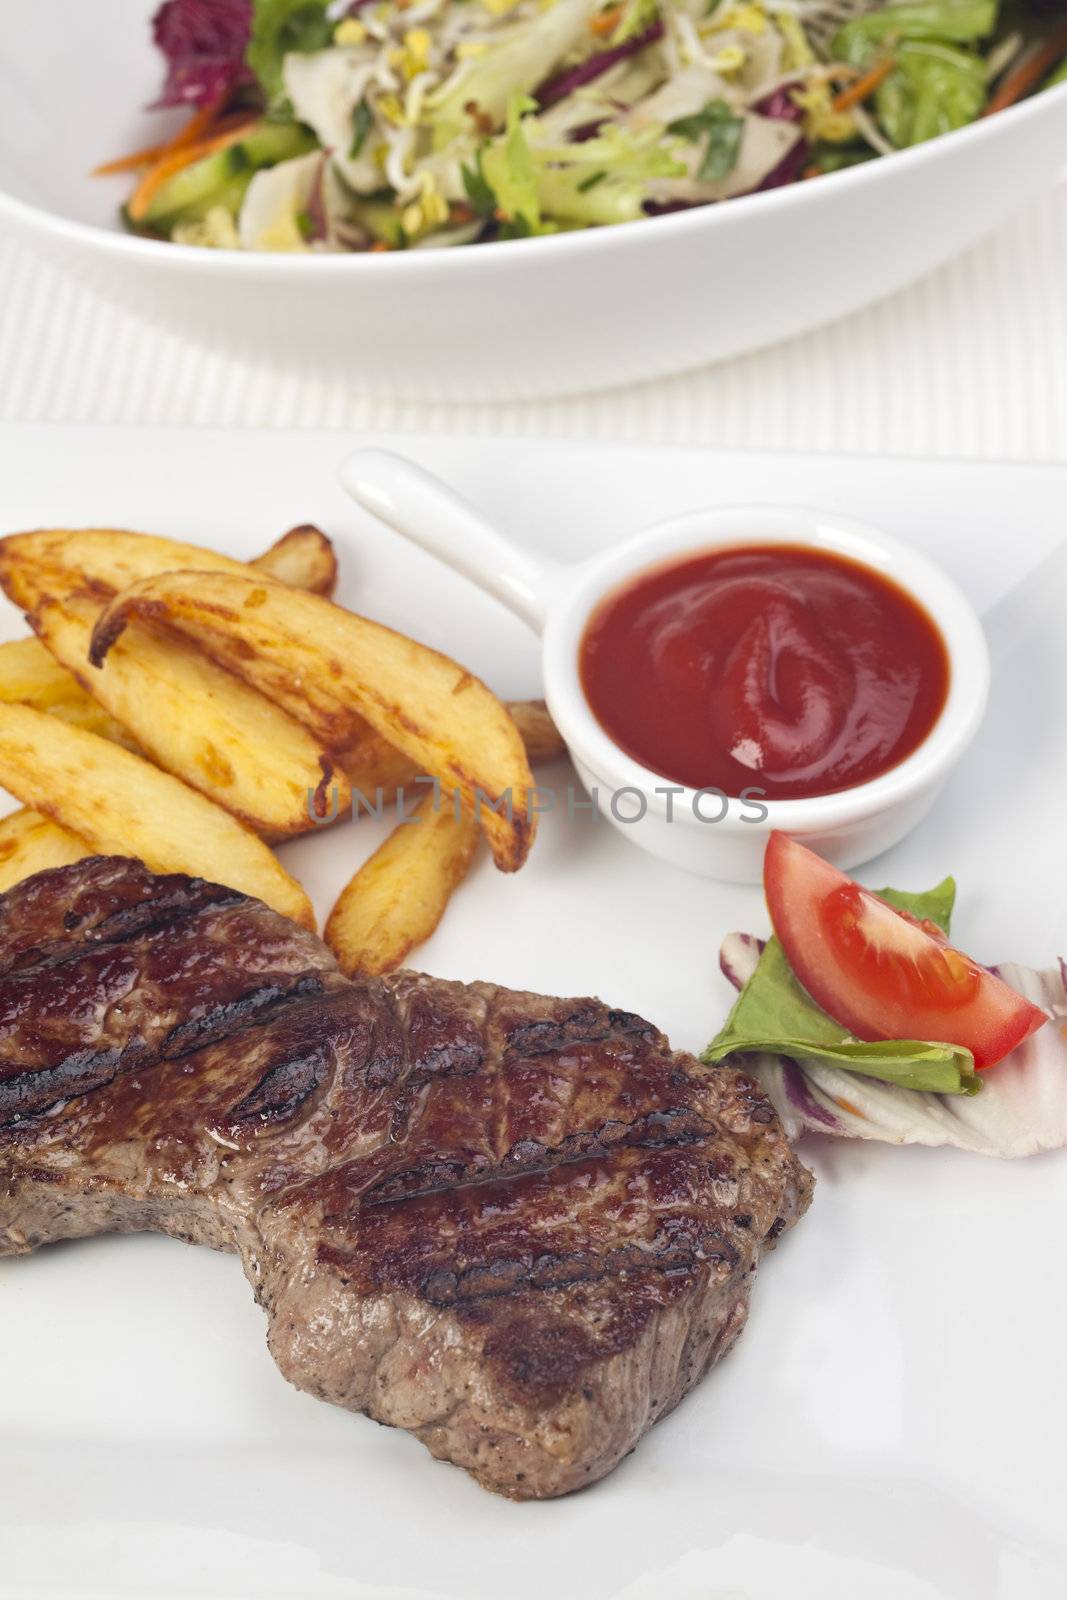 steak and french fries on a plate